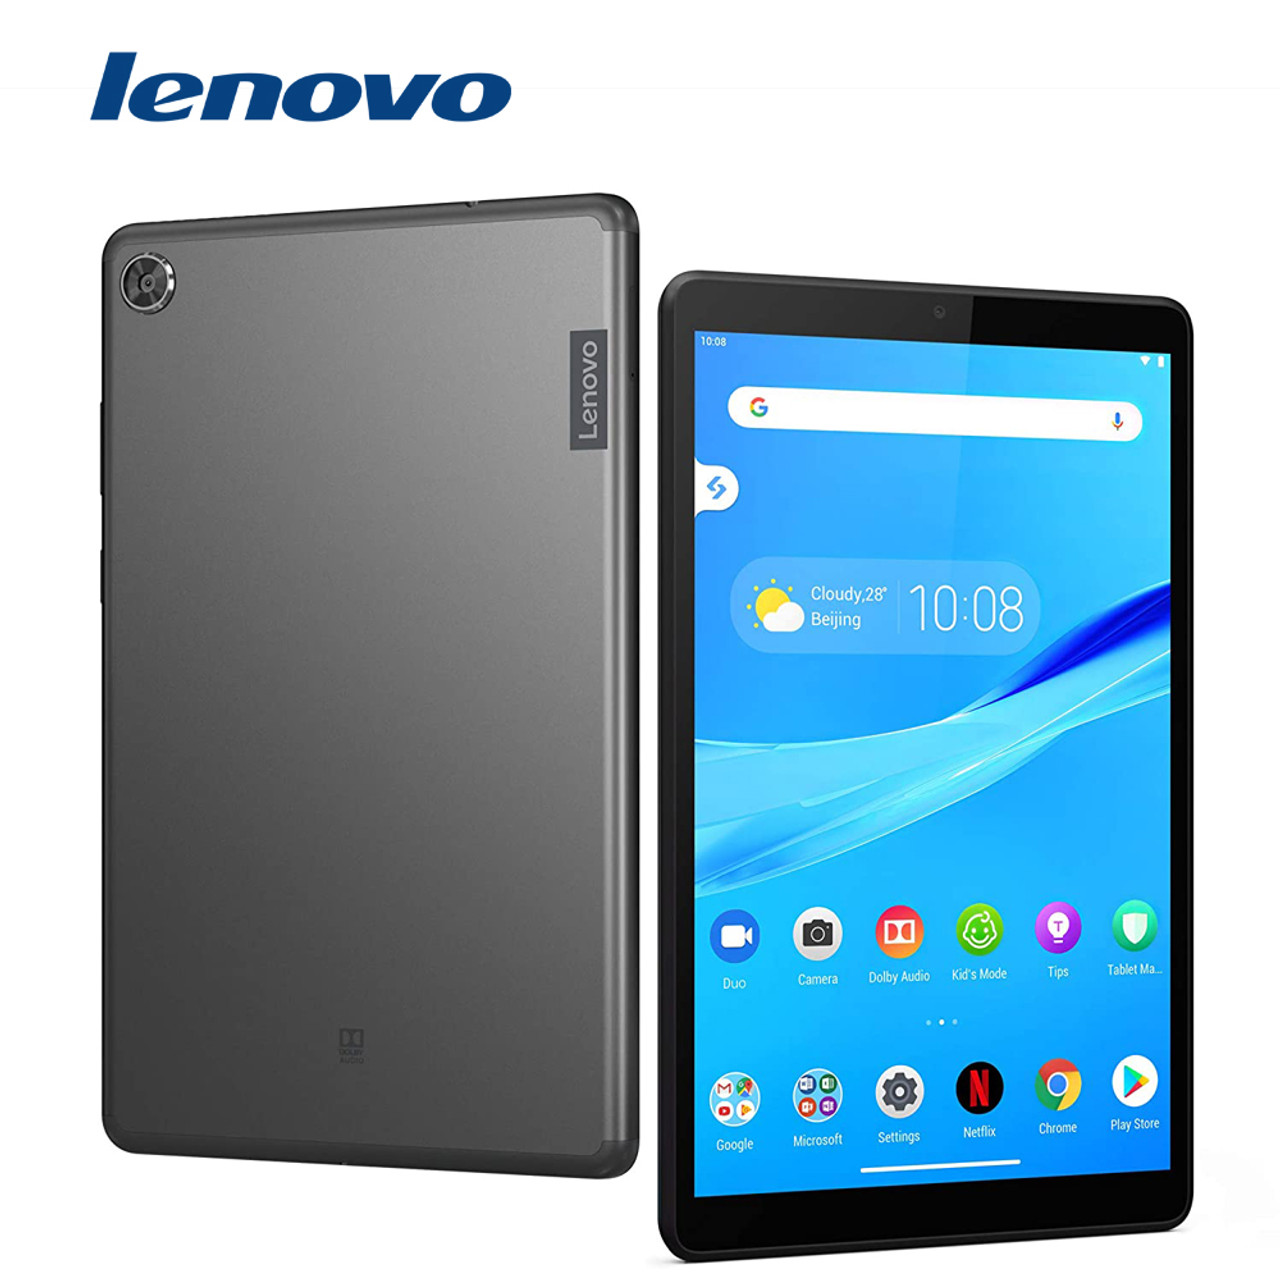 Lenovo® Tab M8 HD Quad-Core Android Tablet (2nd Gen)